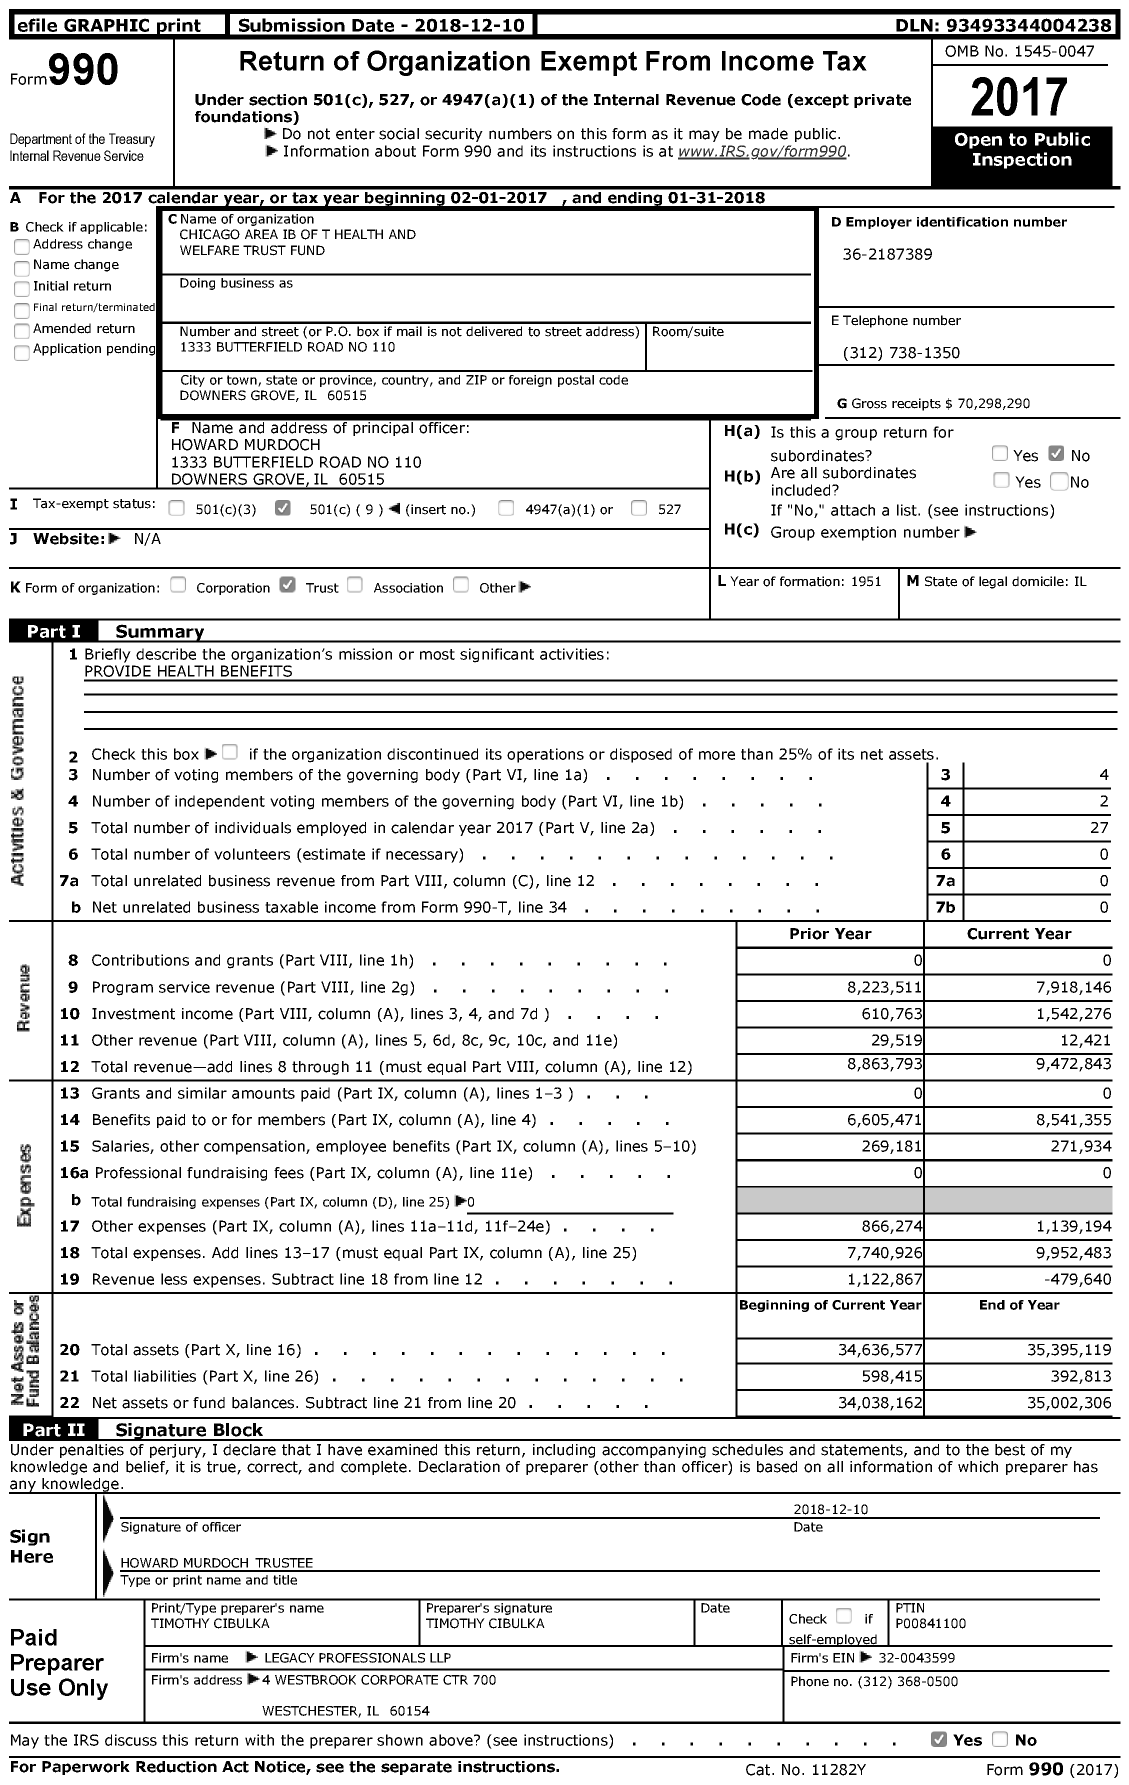 Image of first page of 2017 Form 990 for Chicago Area Ib of T Health and Welfare Trust Fund